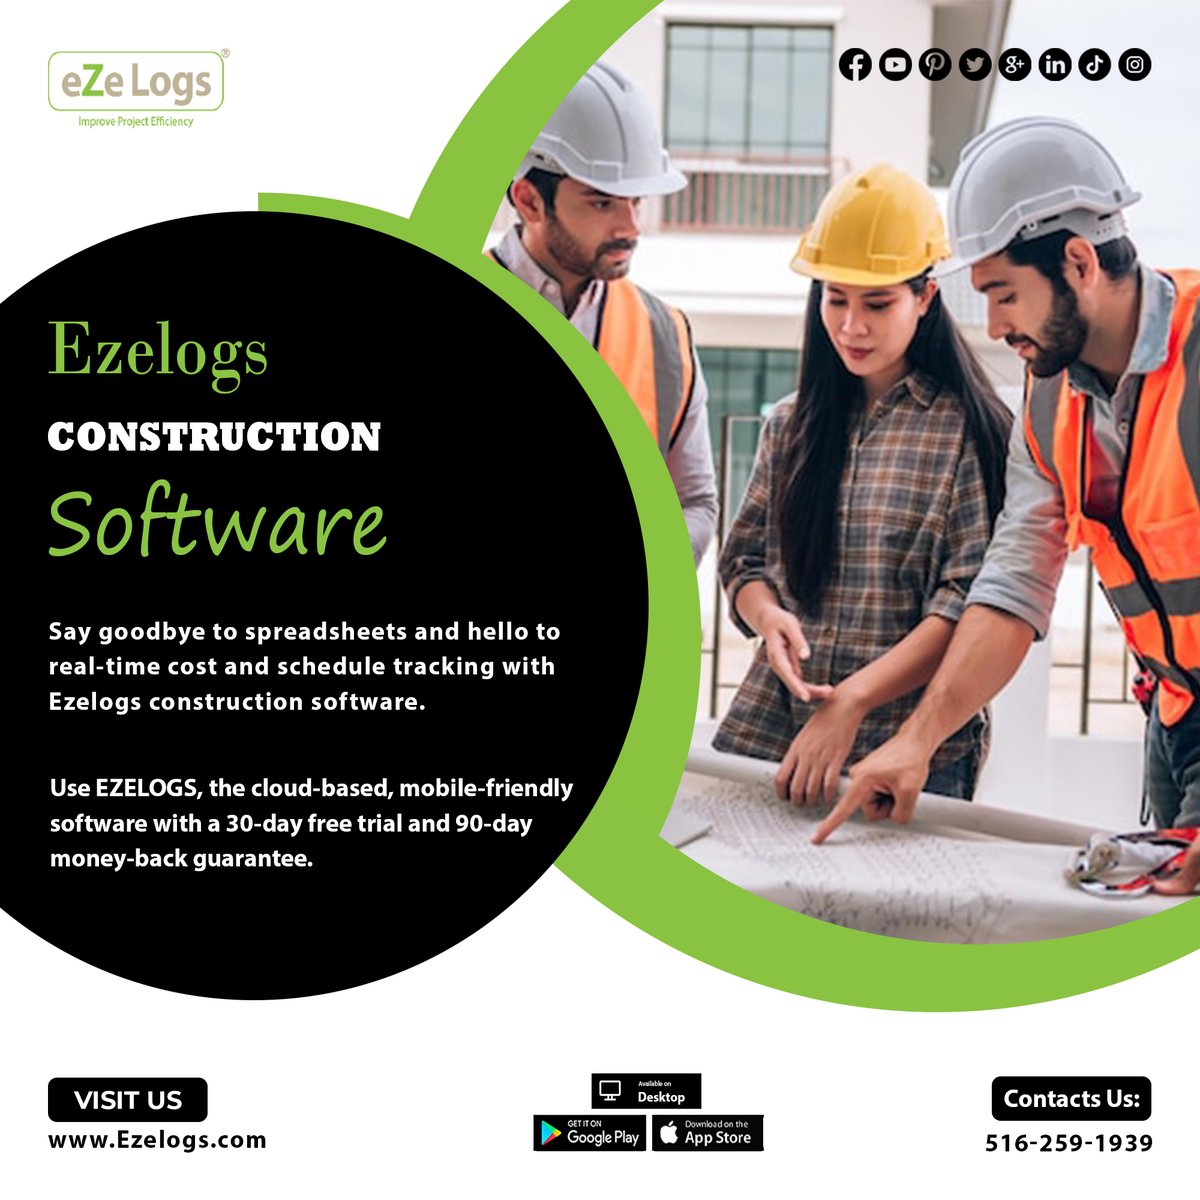 Say goodbye to spreadsheets and hello to real-time cost and schedule tracking with Ezelogs construction software. #construction #software #invoice #fieldmanagement #bidmanagement #timesheets #constructionlogs #dailyreports